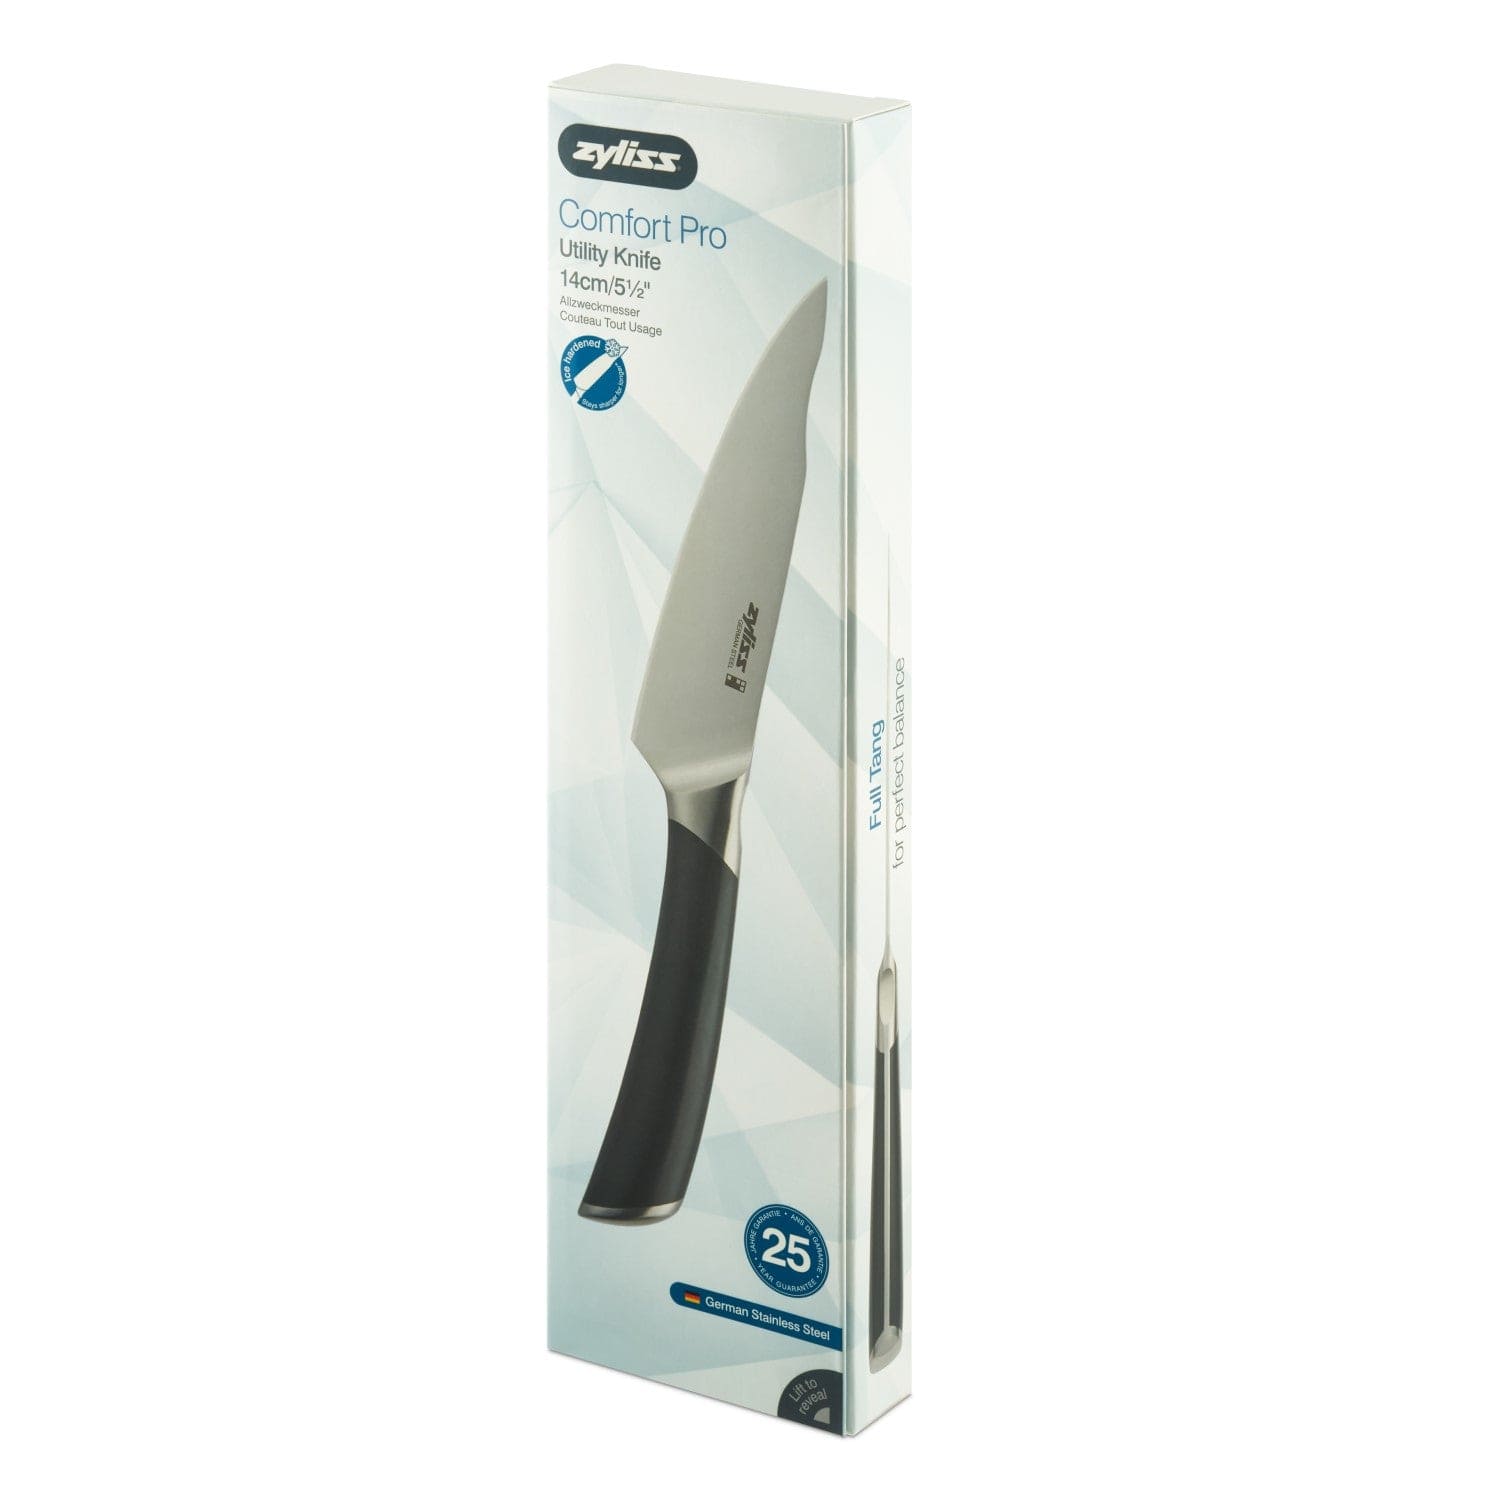 Comfort Pro Utility Knife 5.5 inch